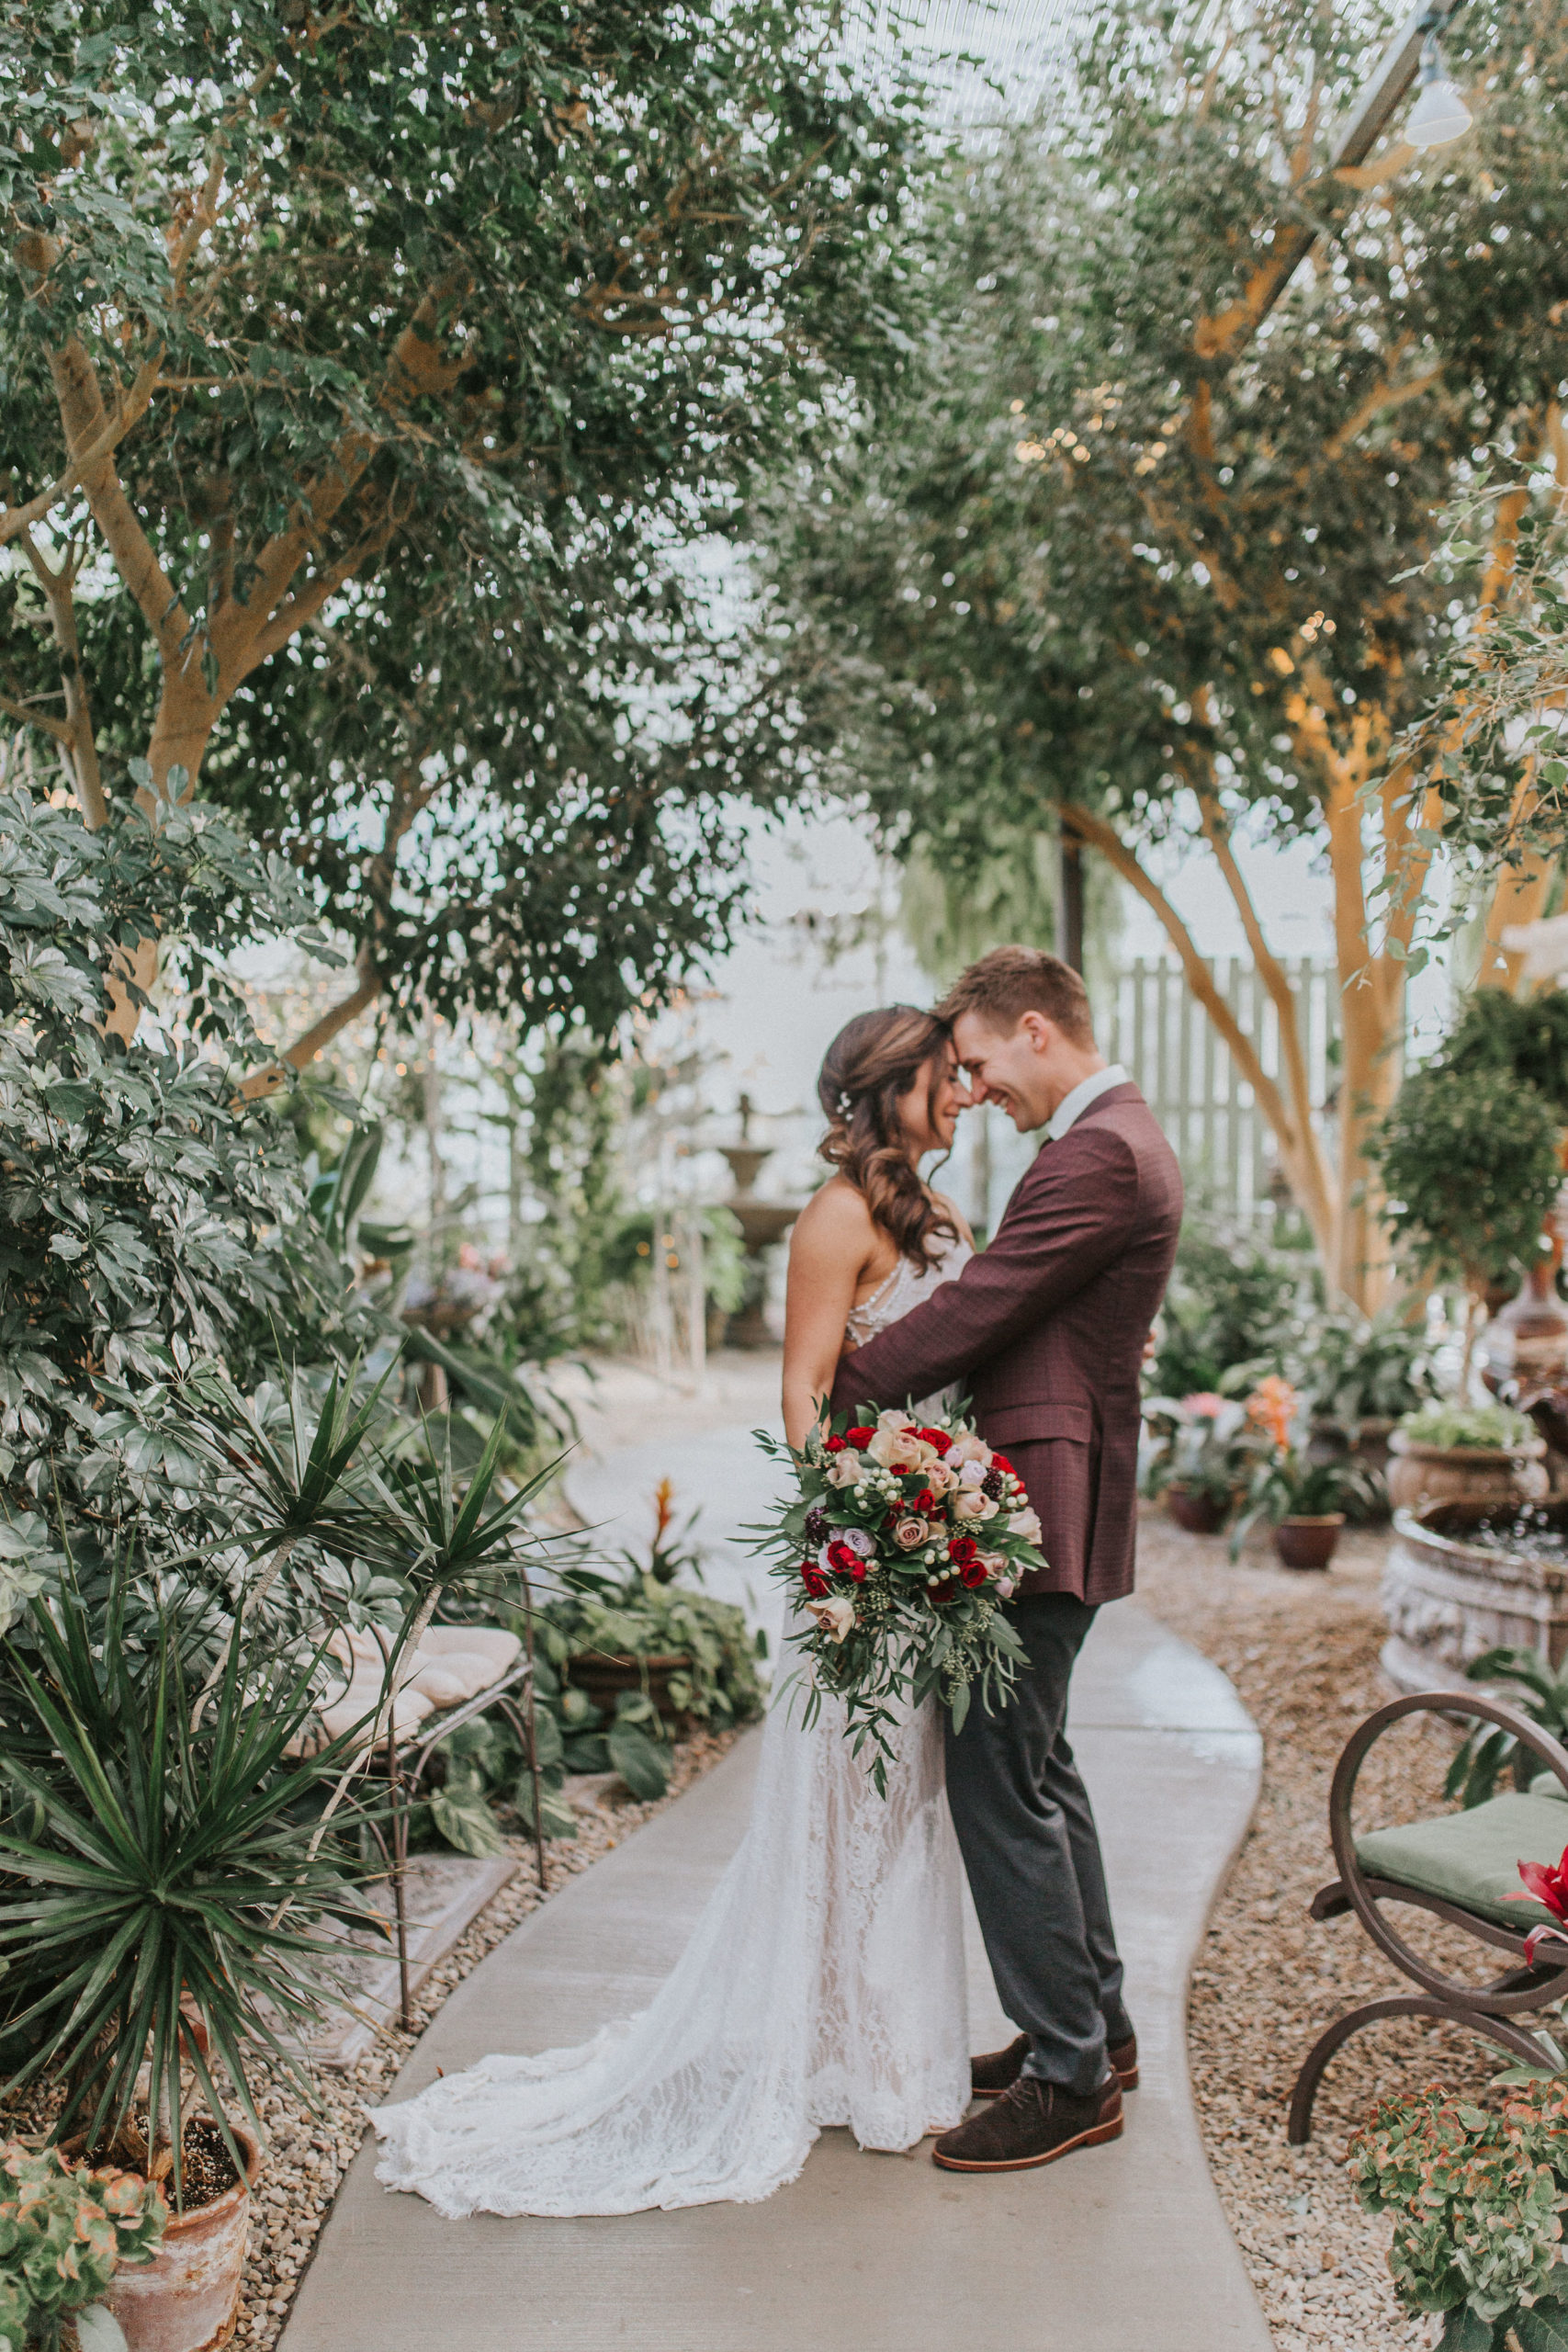 southern wedding couple embracing each other surrounded by flowers and plants, holding a red rose bouquet